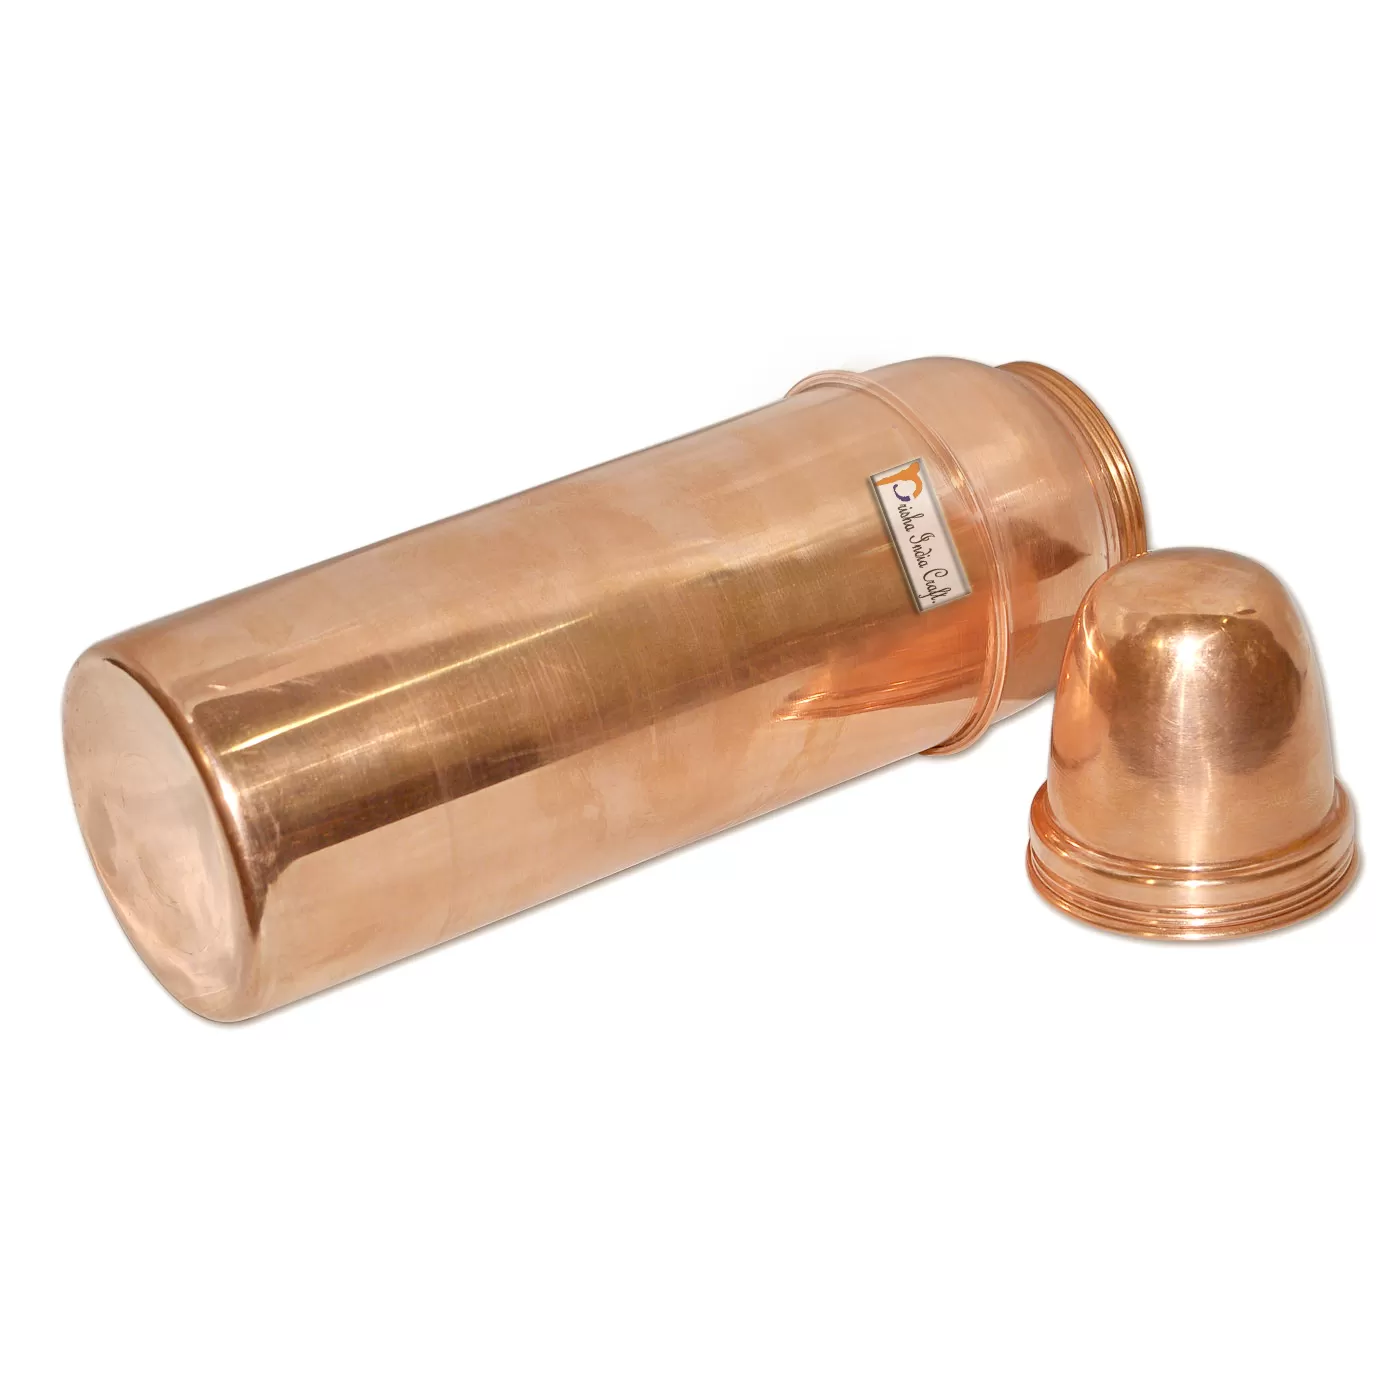 800 ML / 27 oz - Set of 2 - DIWALI GIFT Pure Copper Water Bottle Pitcher for Ayurvedic Health Benefits, 3 image